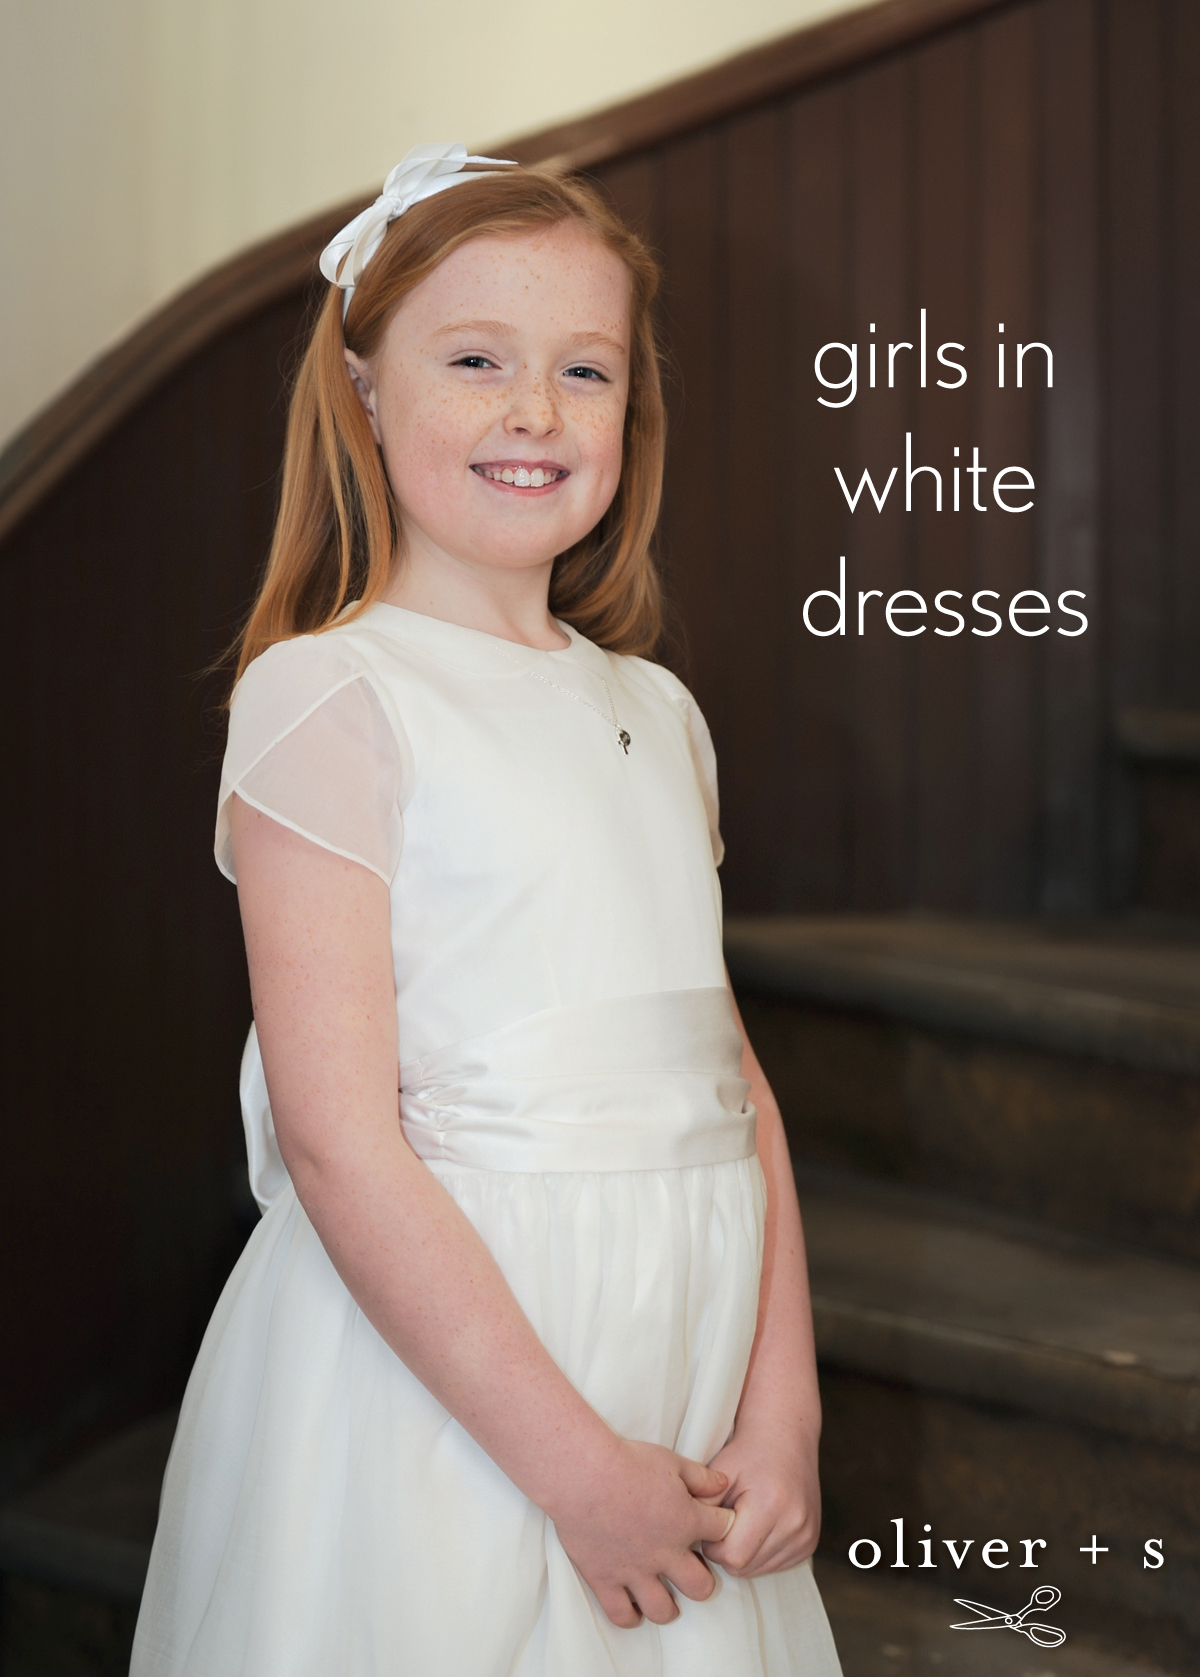 The perfect white dress does exist, and @jacylenore found it. Meet